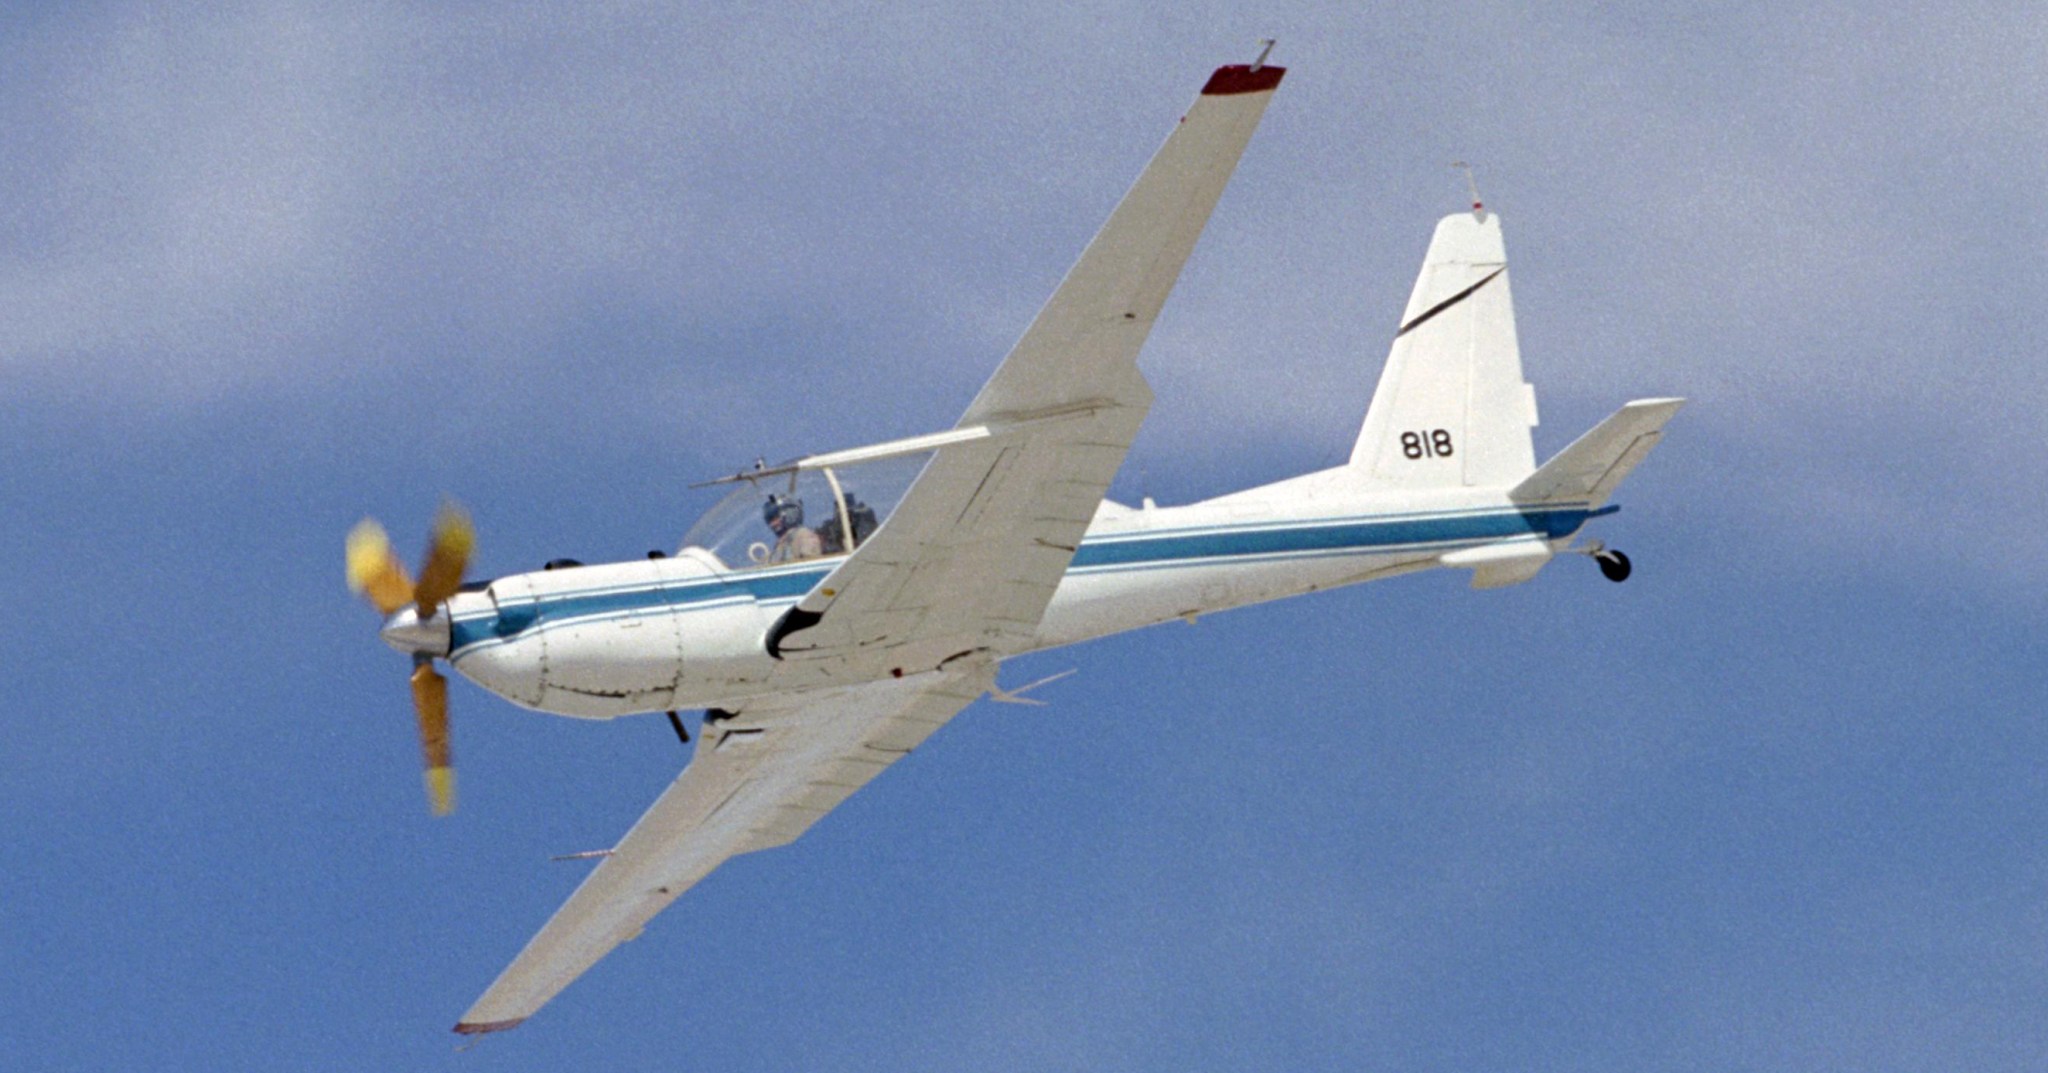 YO-3A with microphones mounted on the tail and wingtips to measure noise.